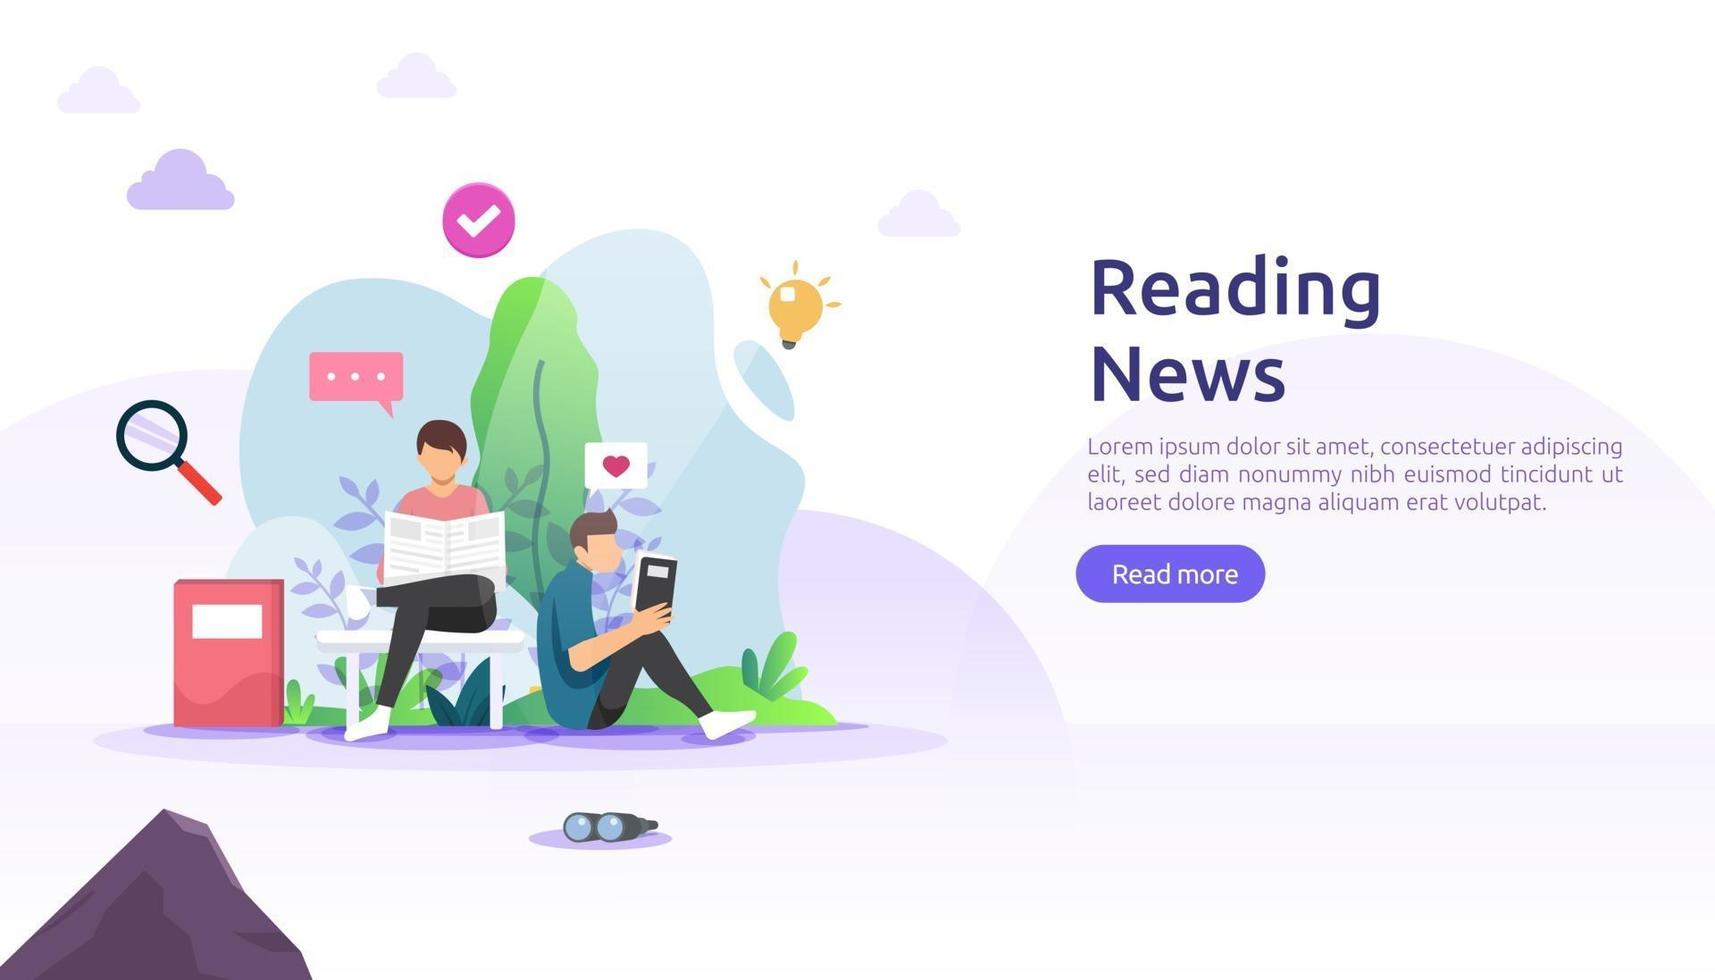 reading newspapers and online news article media on smartphone concept with people character. flat illustration template for web landing page, banner, presentation, social, poster, ad or print media vector